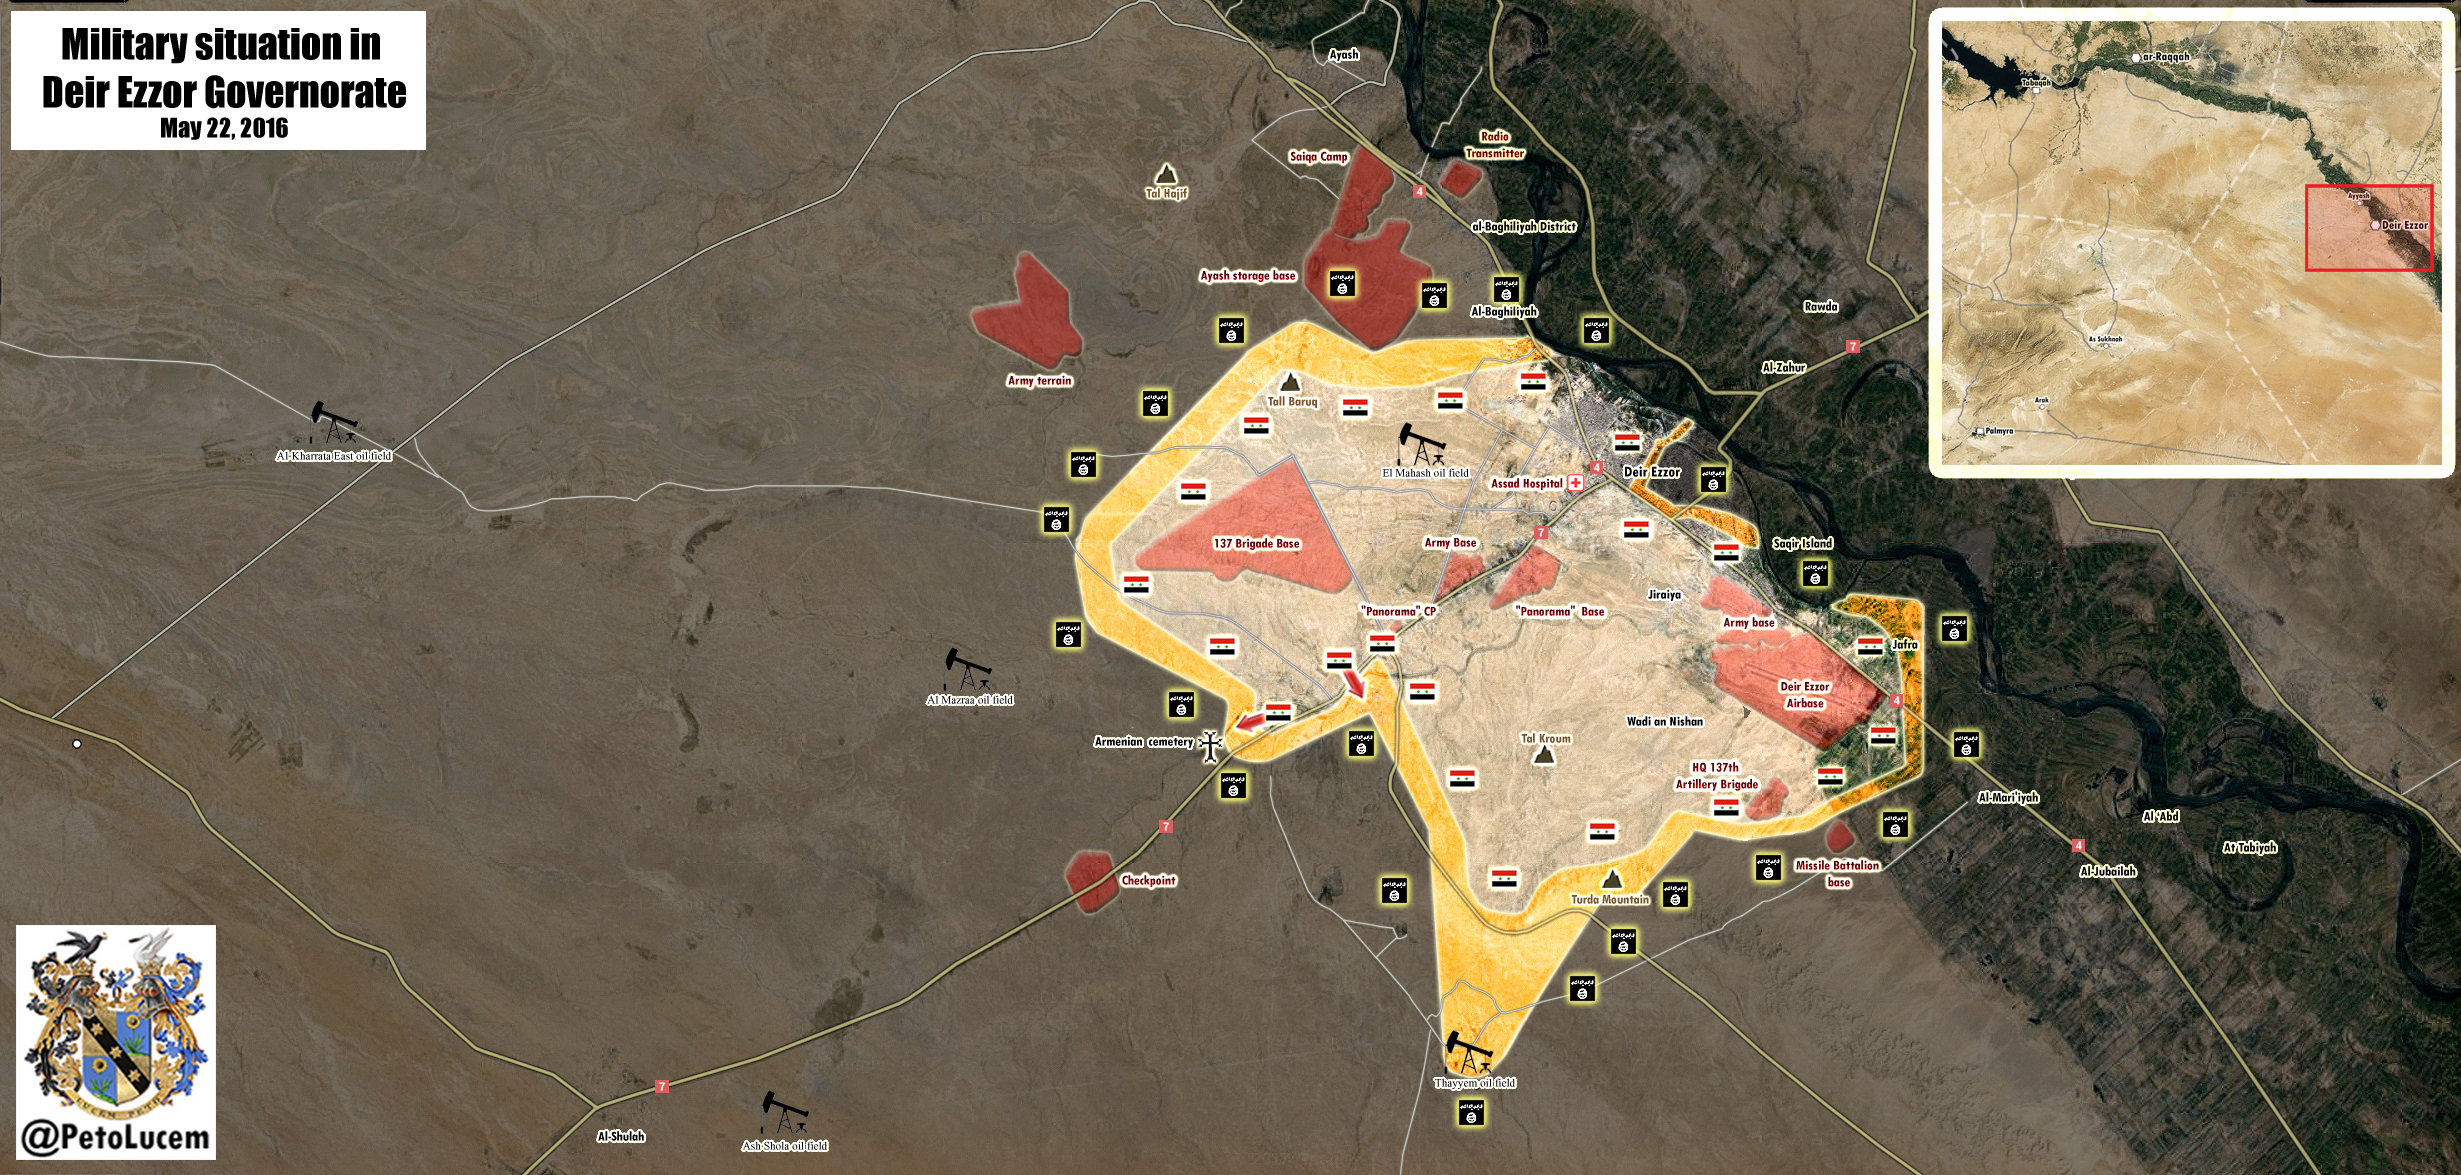 Military Situation in Deir Ezzor, Syria on May 22